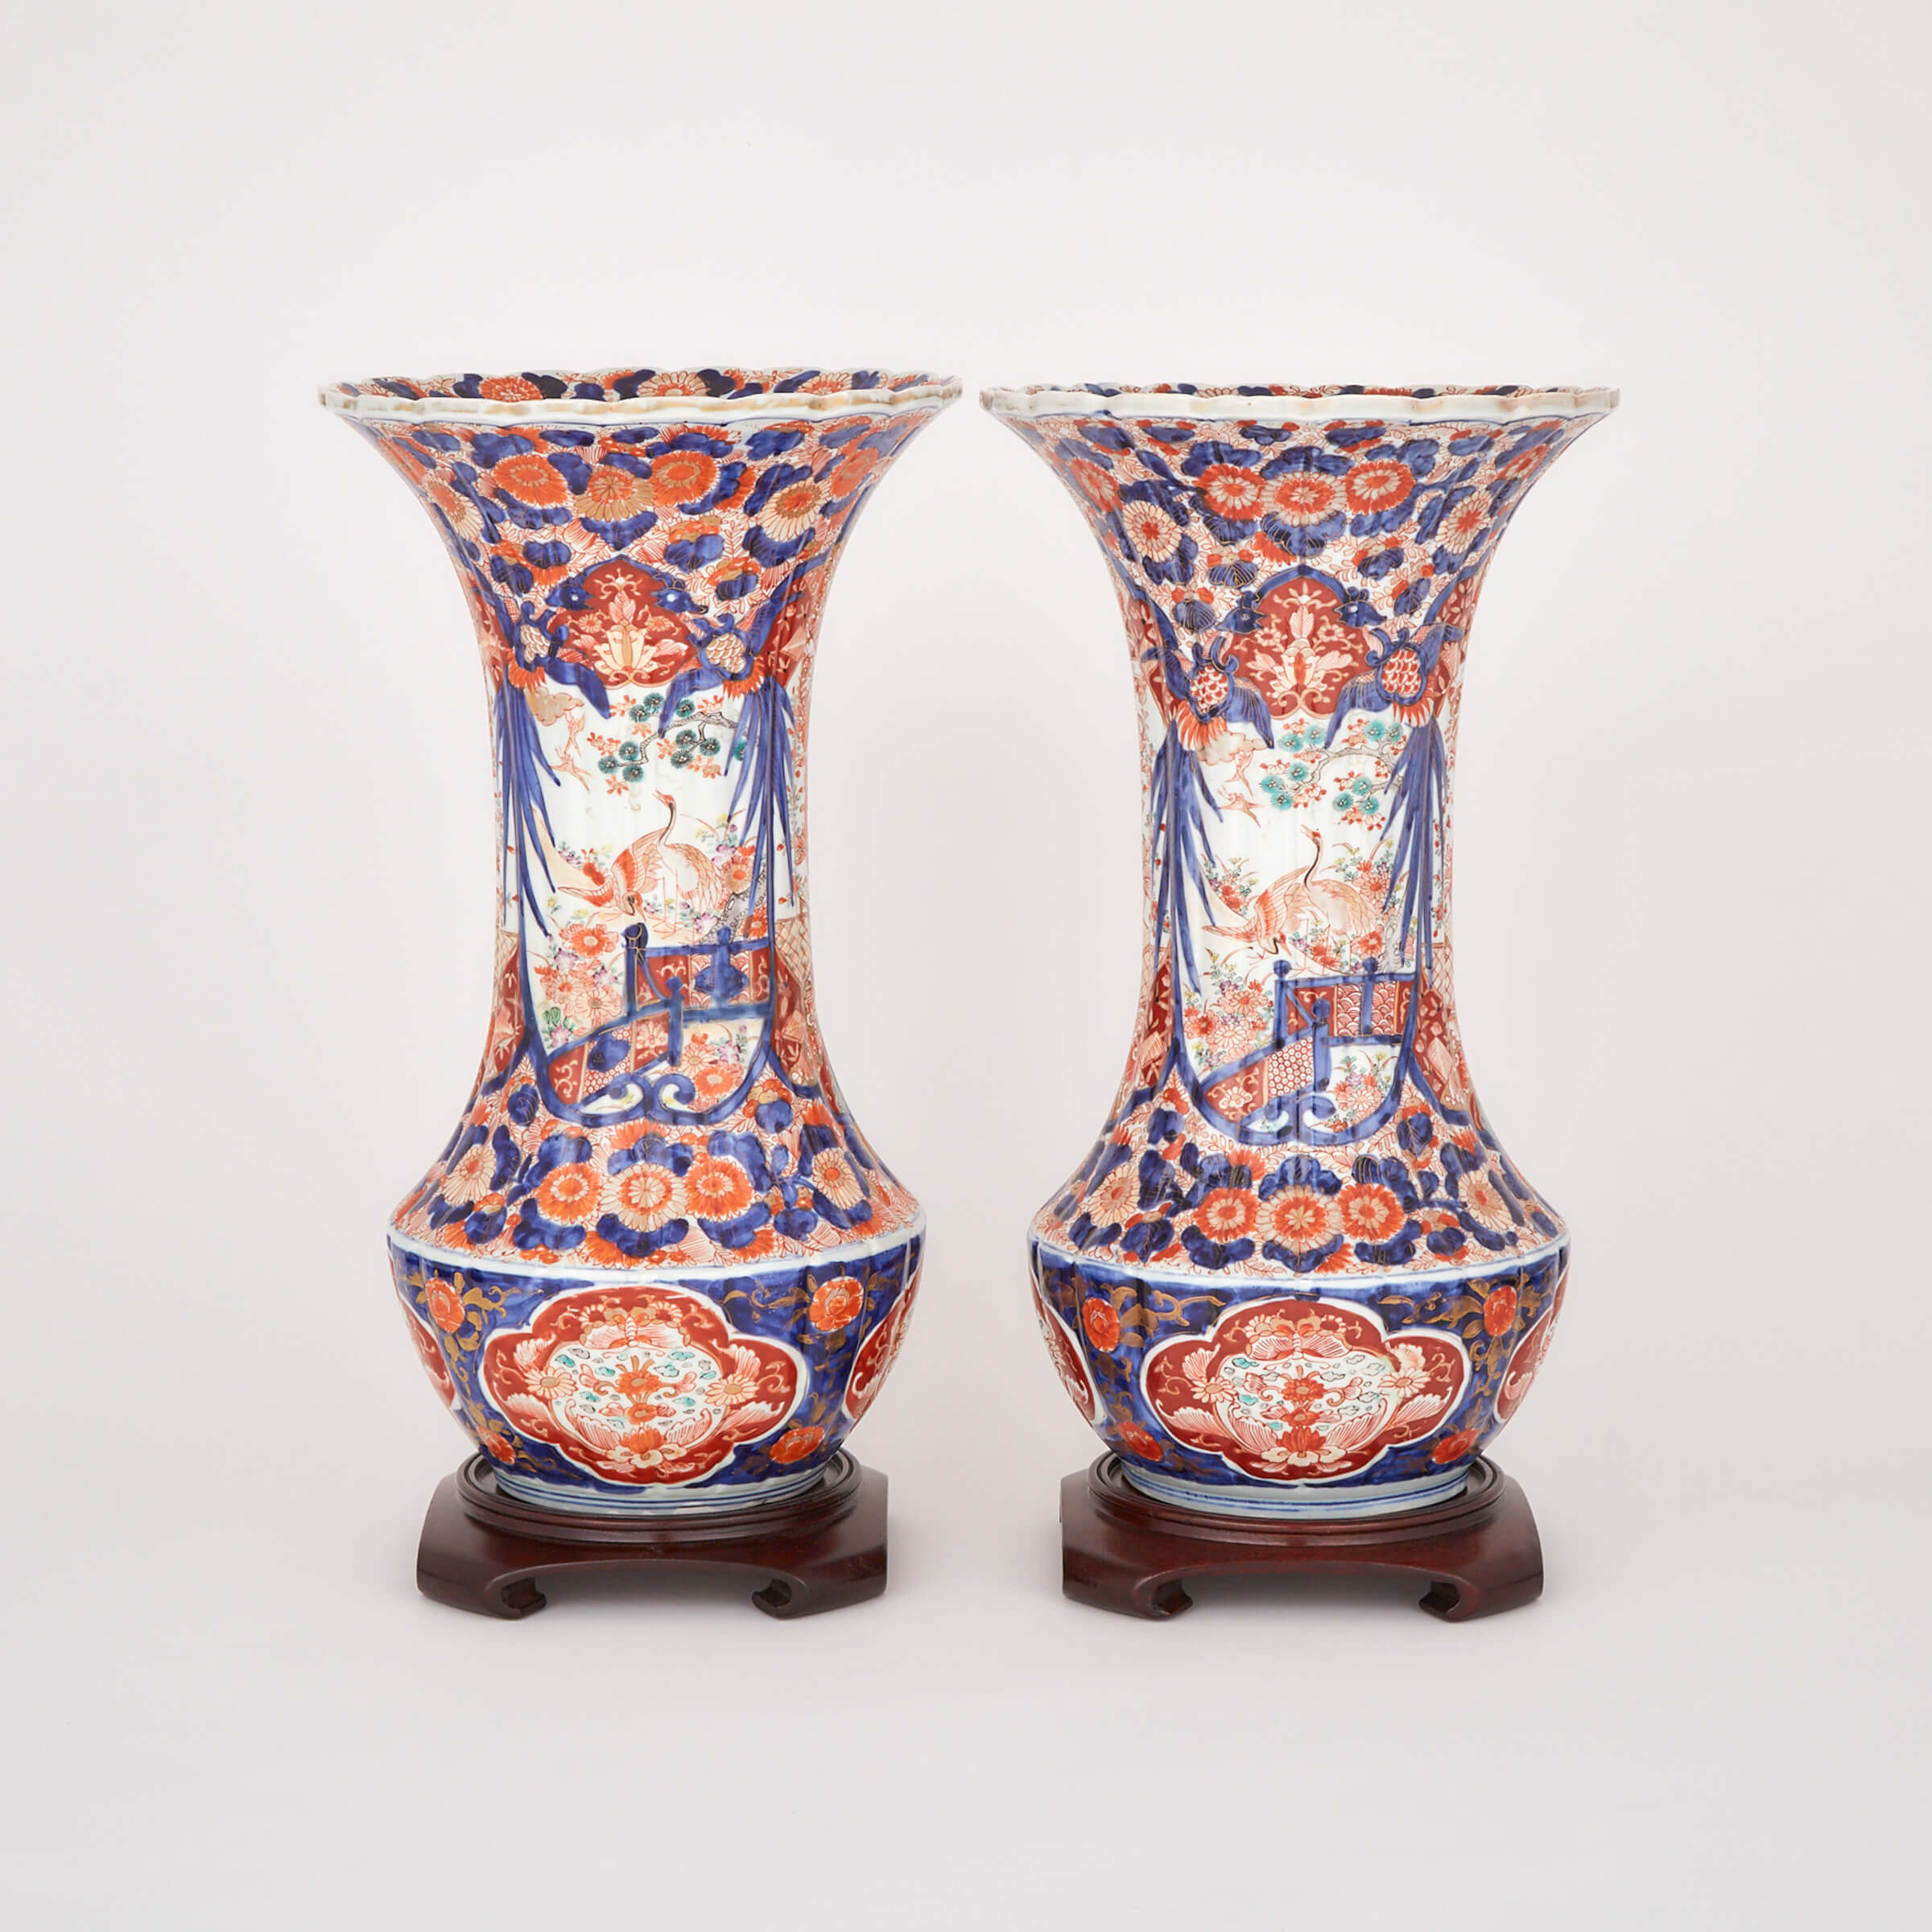 A Pair of Large Imari Vases, Late 19th/Early 20th century 